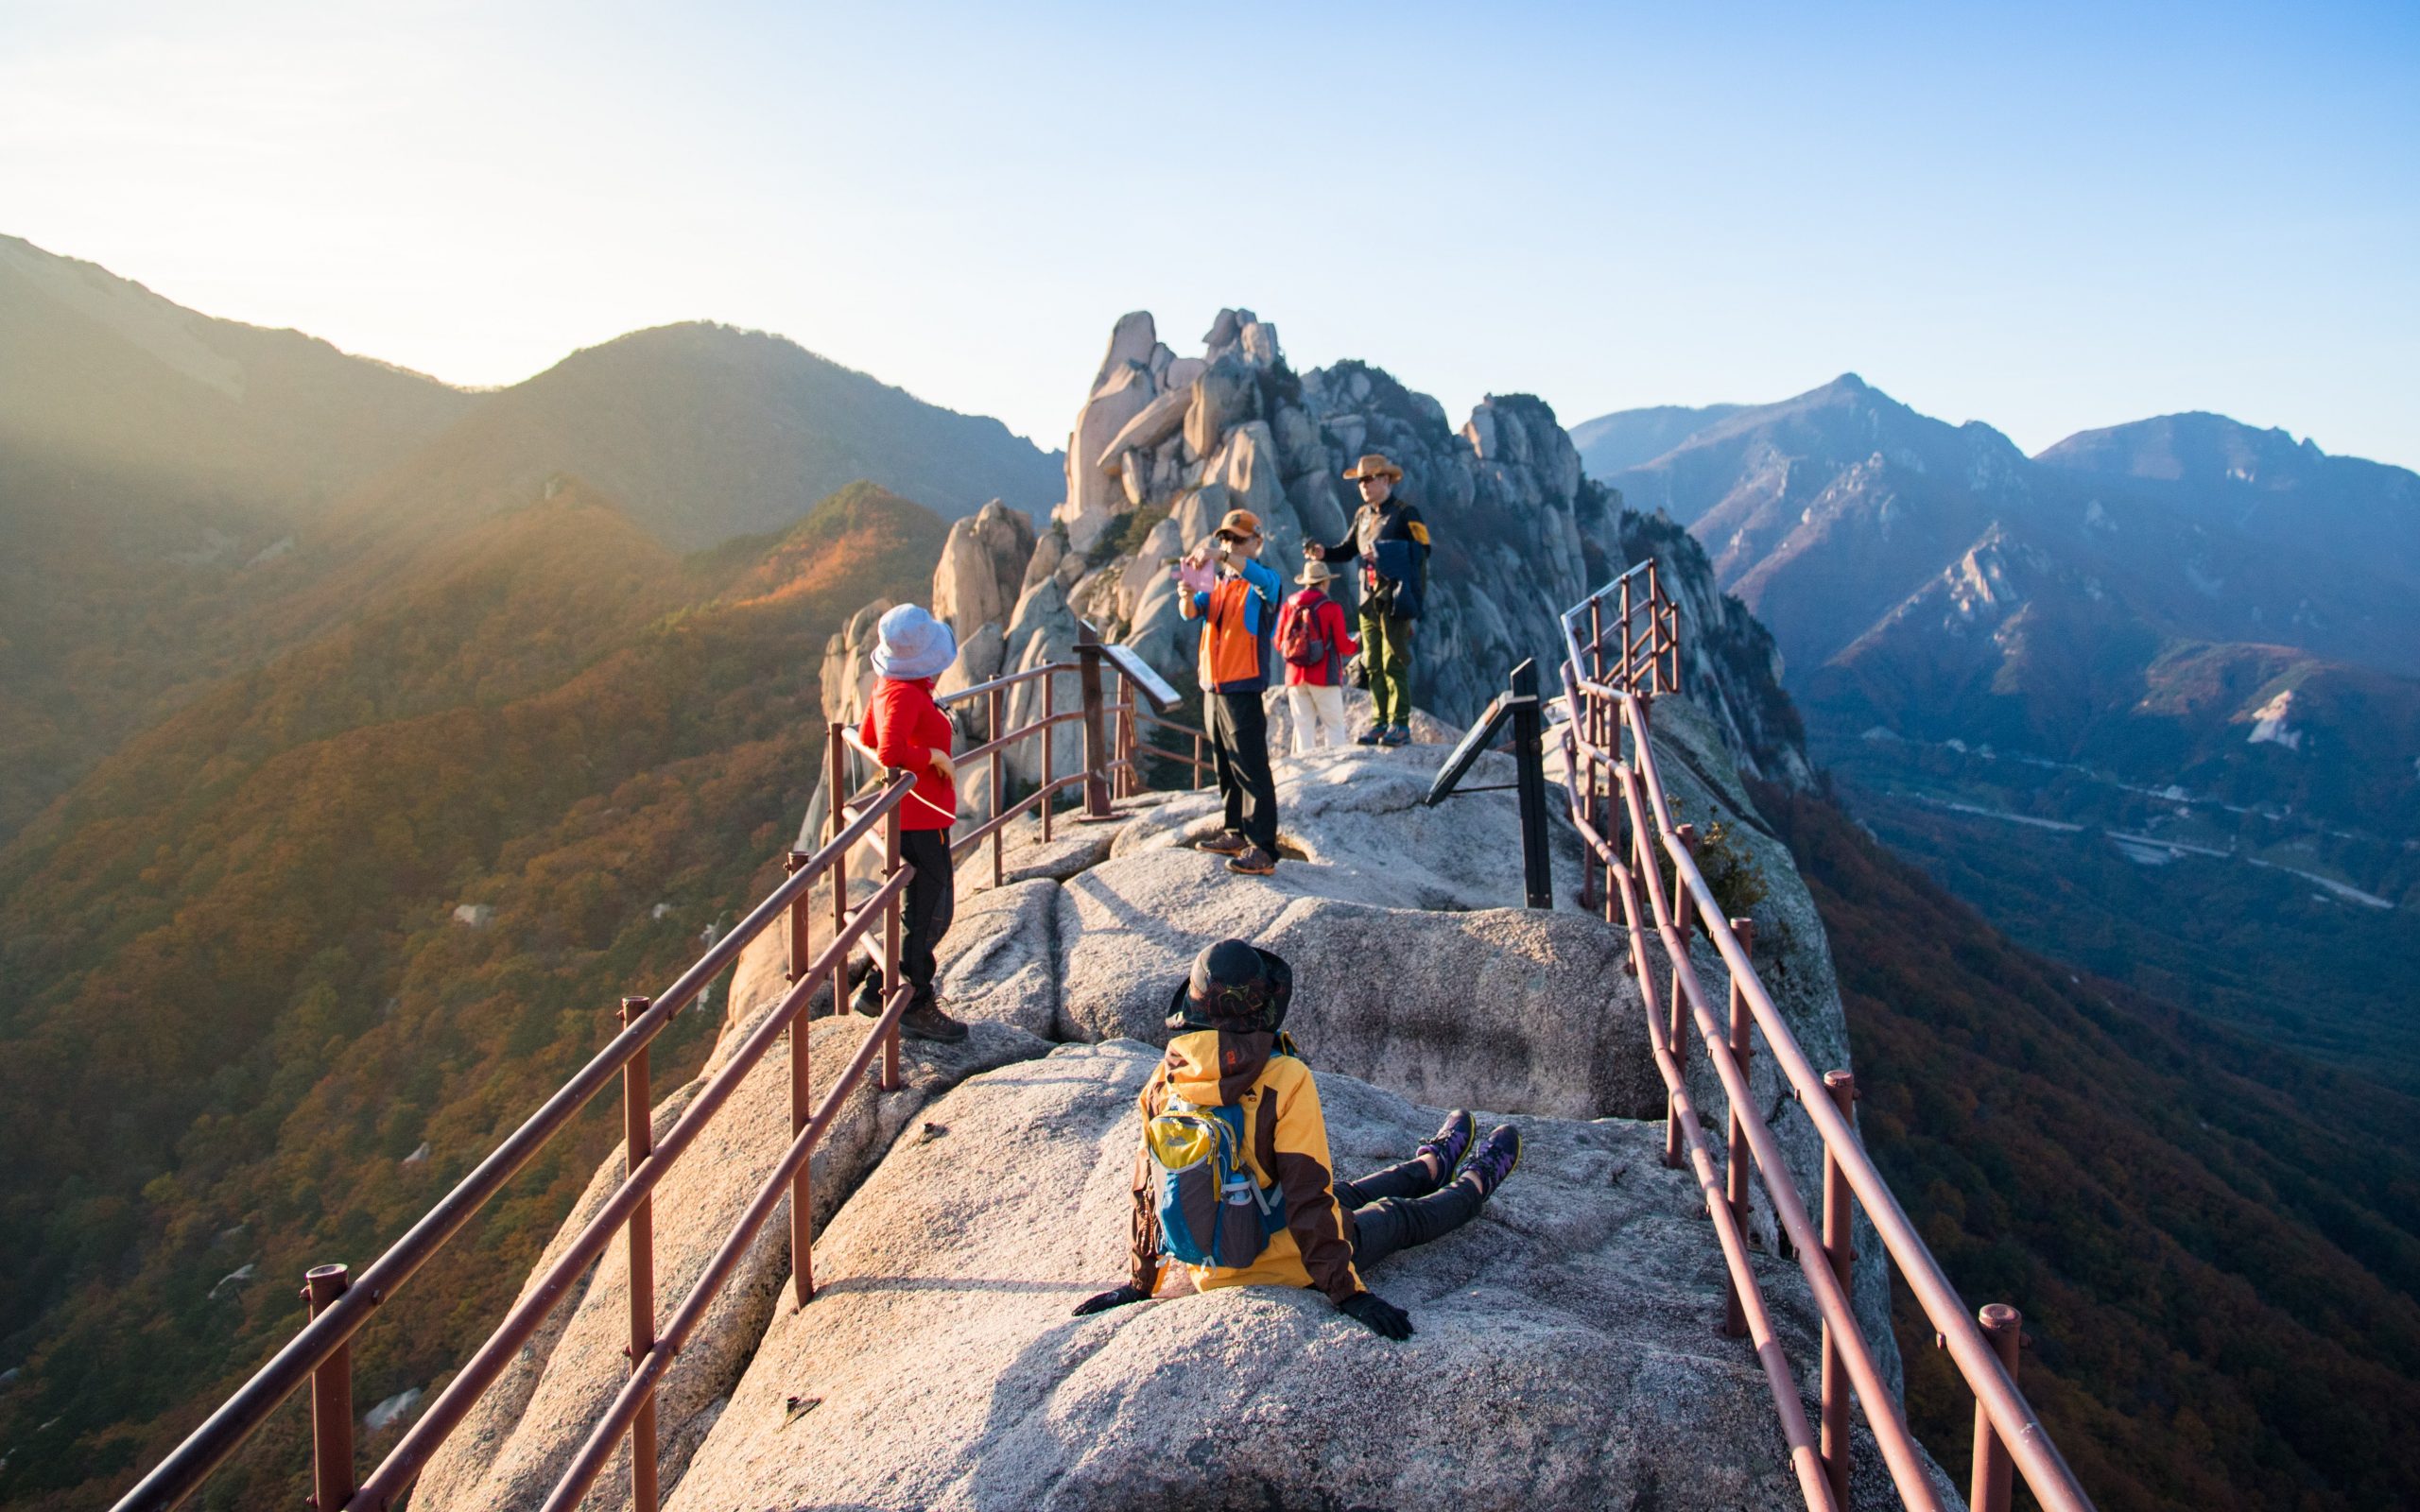 Group of people hiking in South Korea